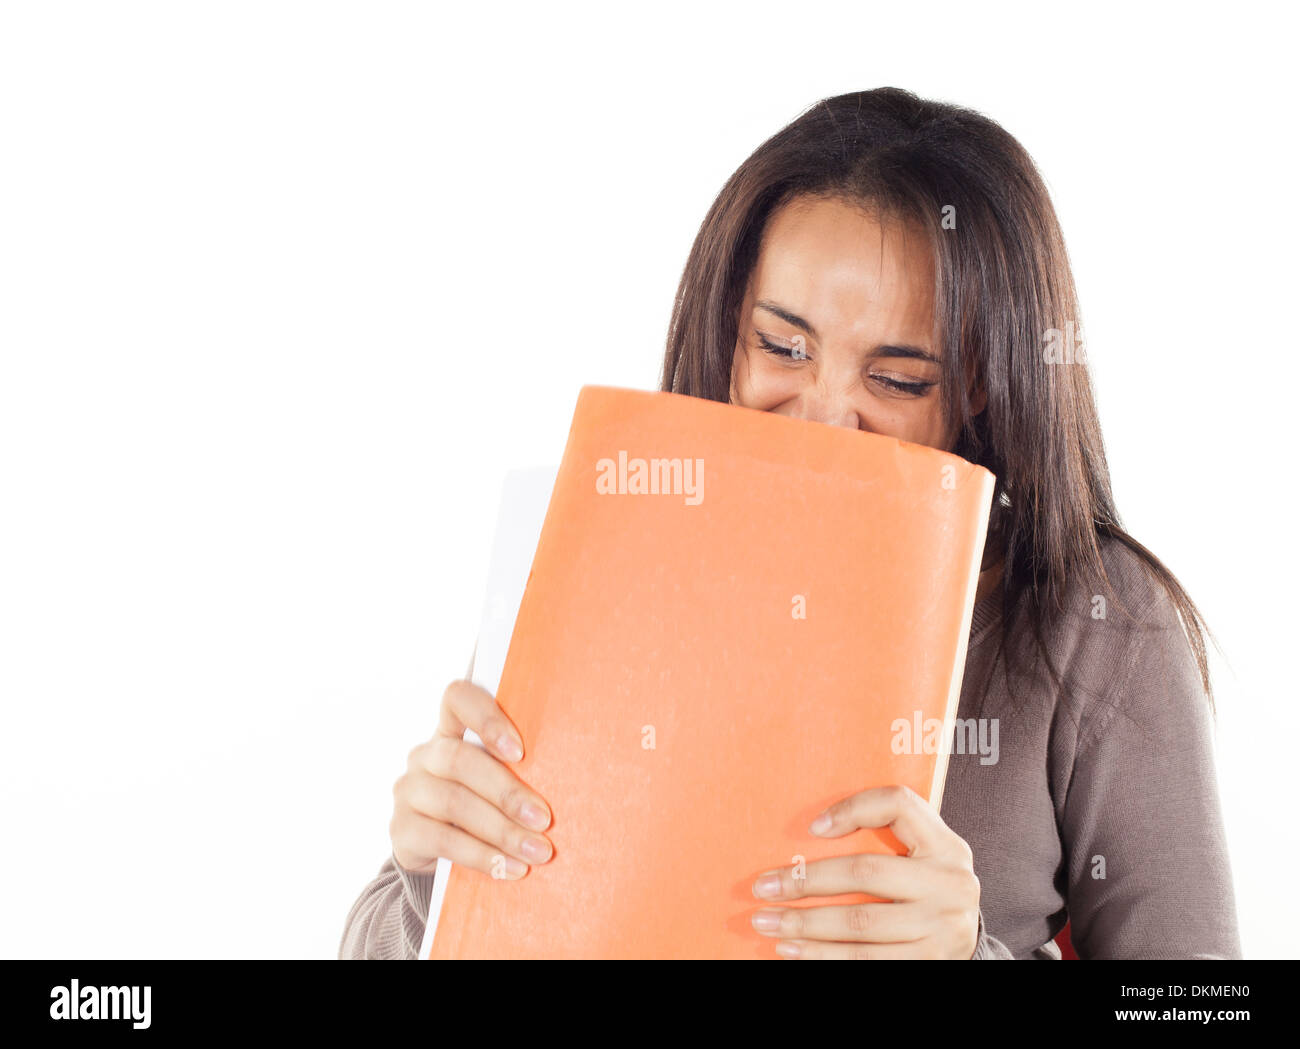 Secretary stressed which carries files Stock Photo